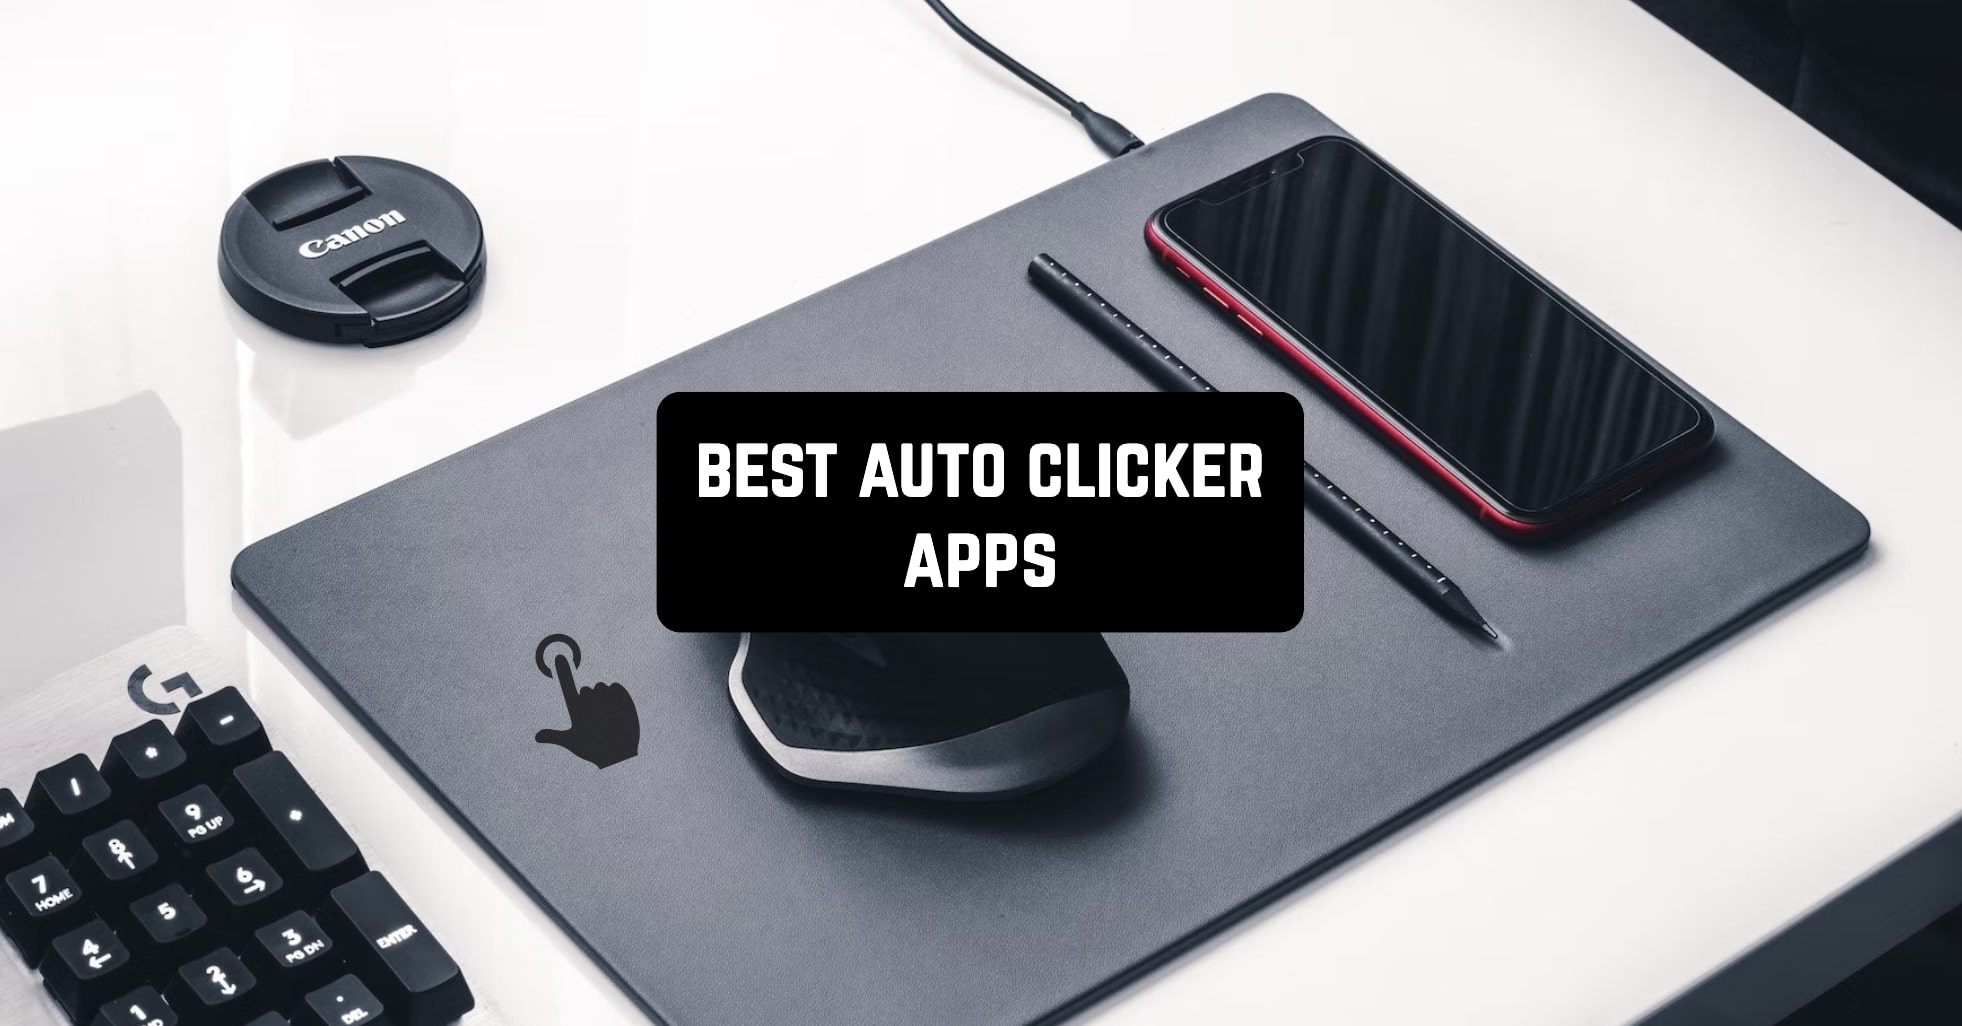 Auto Clicker Pro: Game master - Apps on Google Play